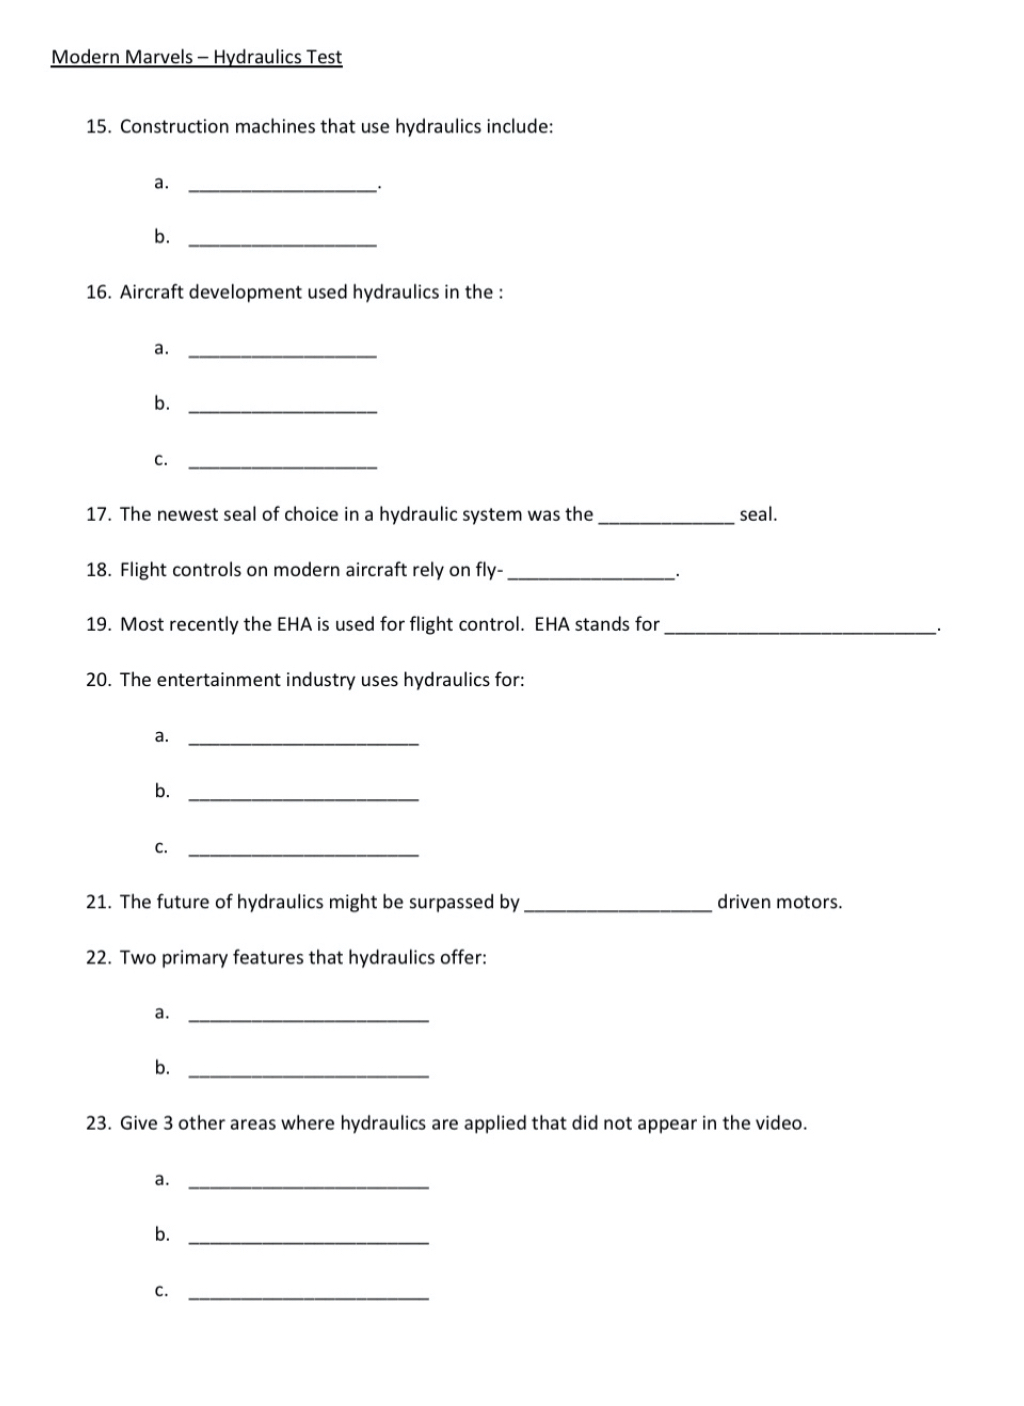 Modern Marvels Cattle Ranches Worksheet Answer Key